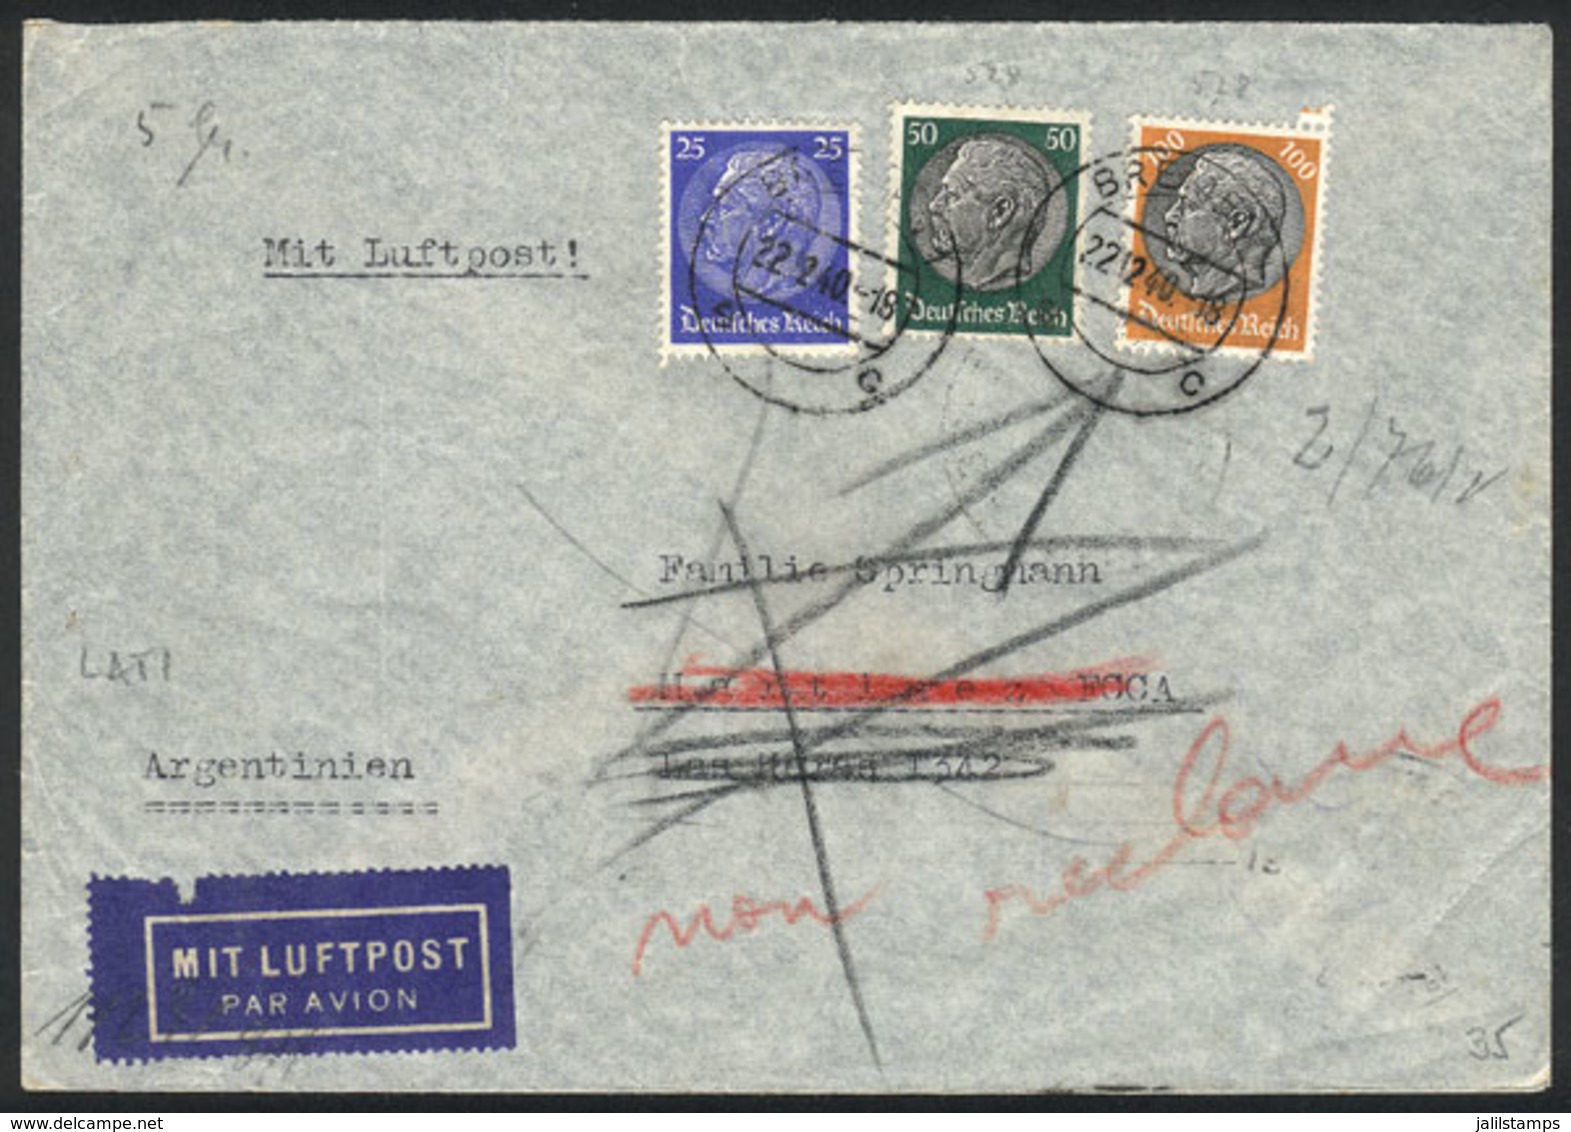 GERMANY: Airmail Cover Sent From Bremen To Buenos Aires On 22/DE/1940 Franked With 1.75Mk., Nazi Censor Label On Back, R - Vorphilatelie